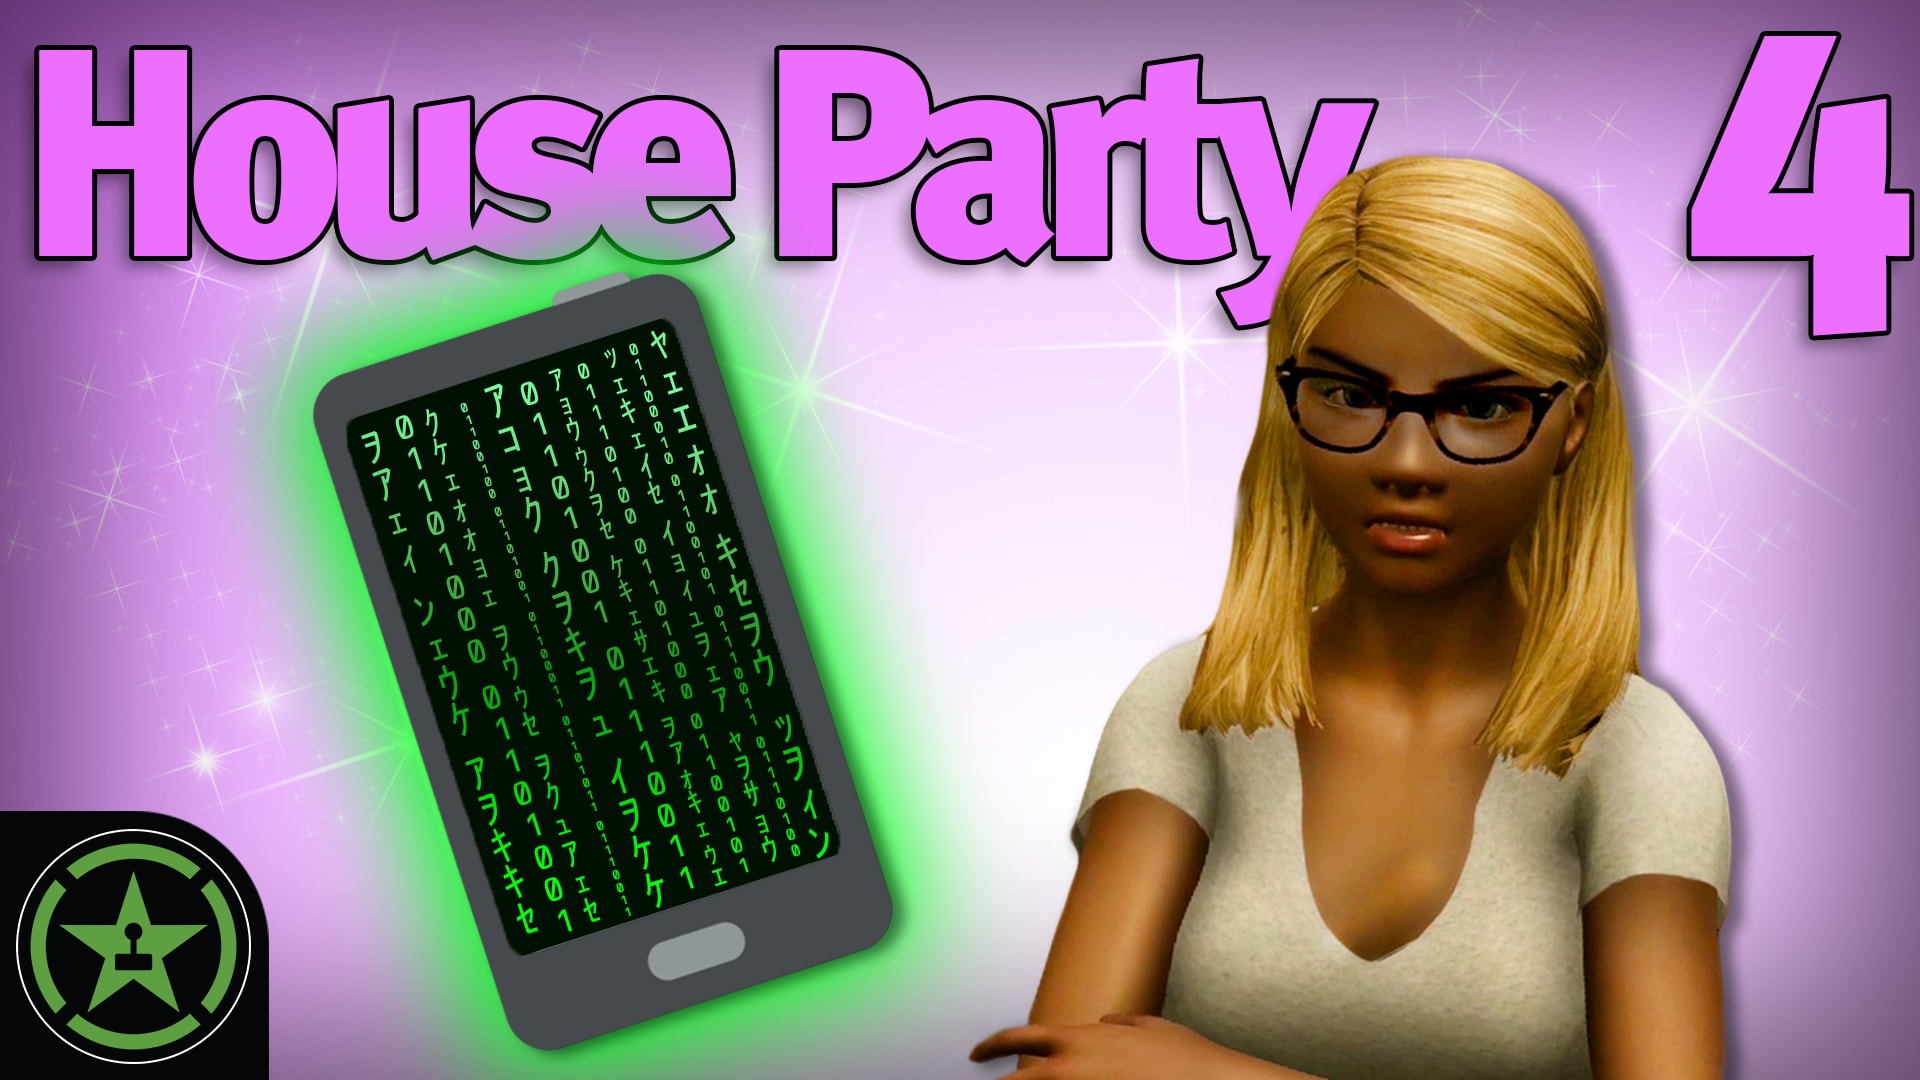 brandy thibodeaux recommends house party game rachel uncensored pic